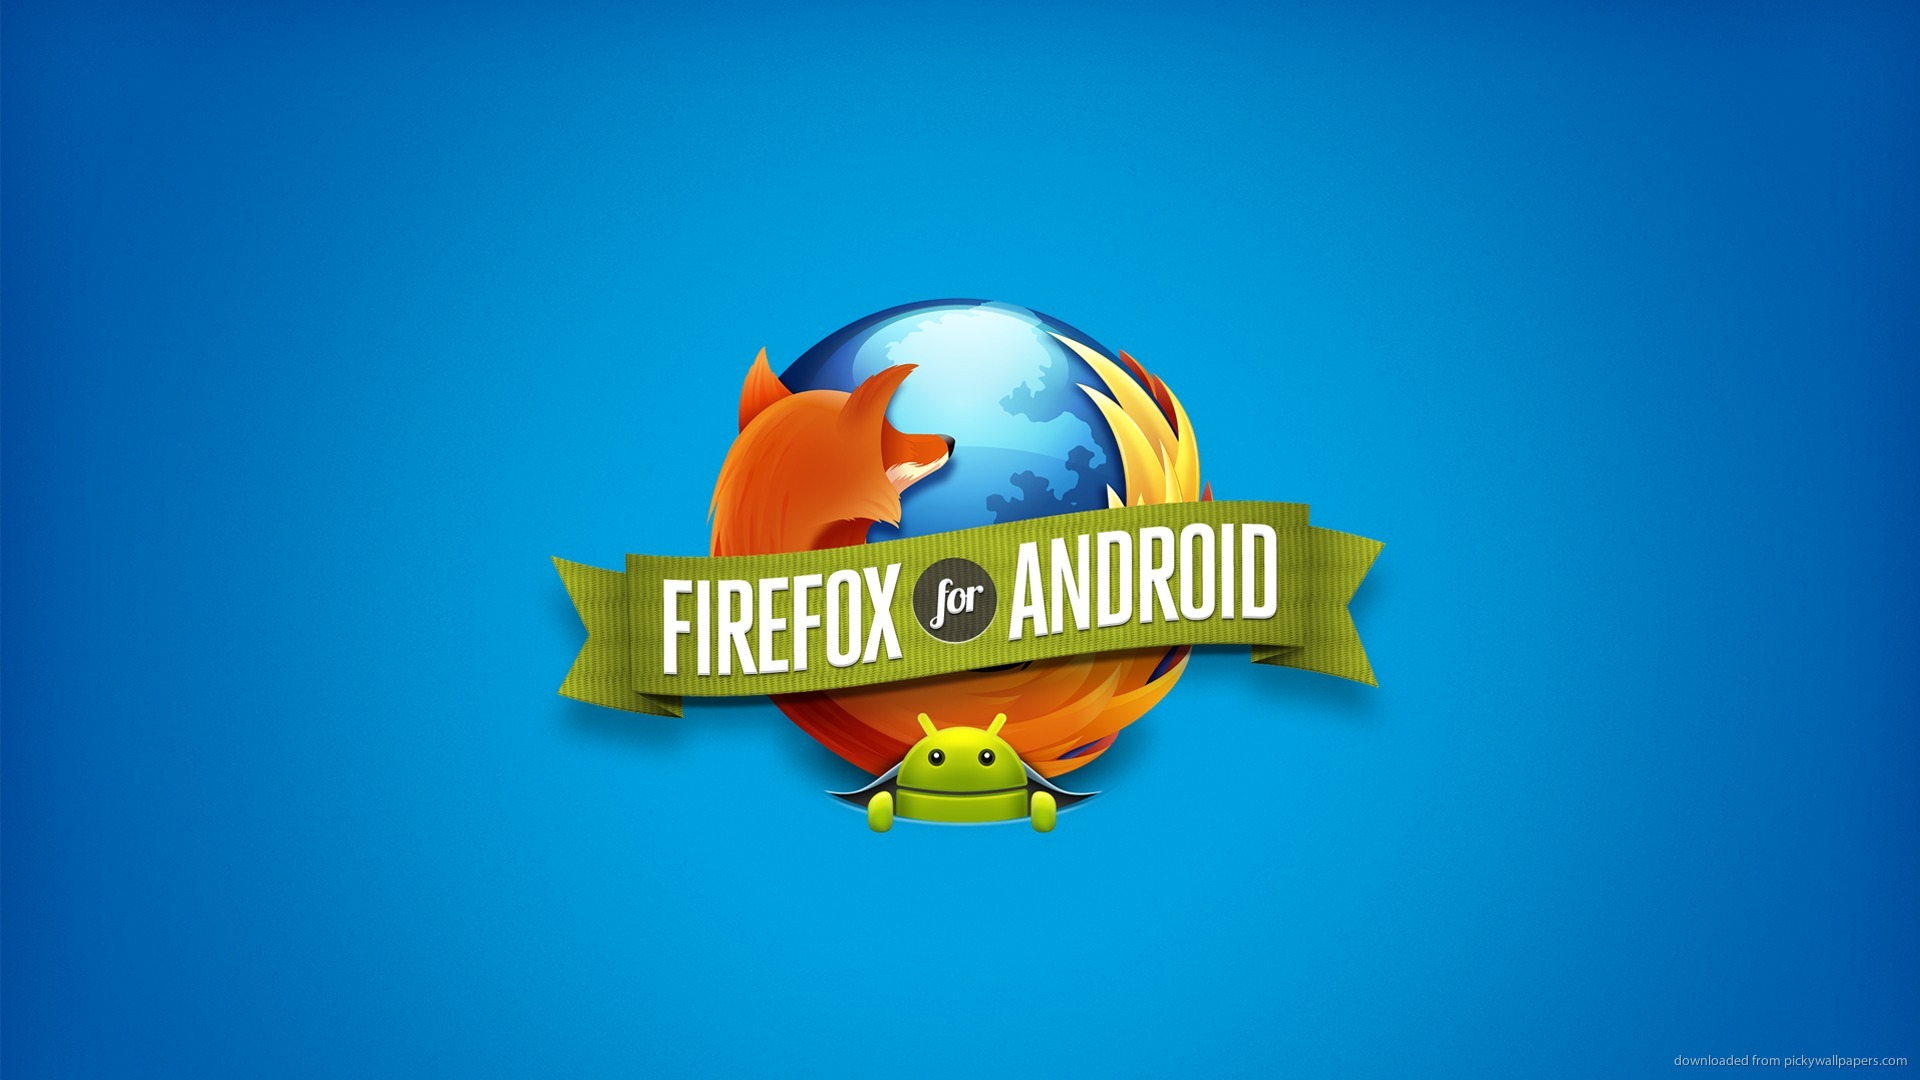 Puters Firefox For Android Wallpaper